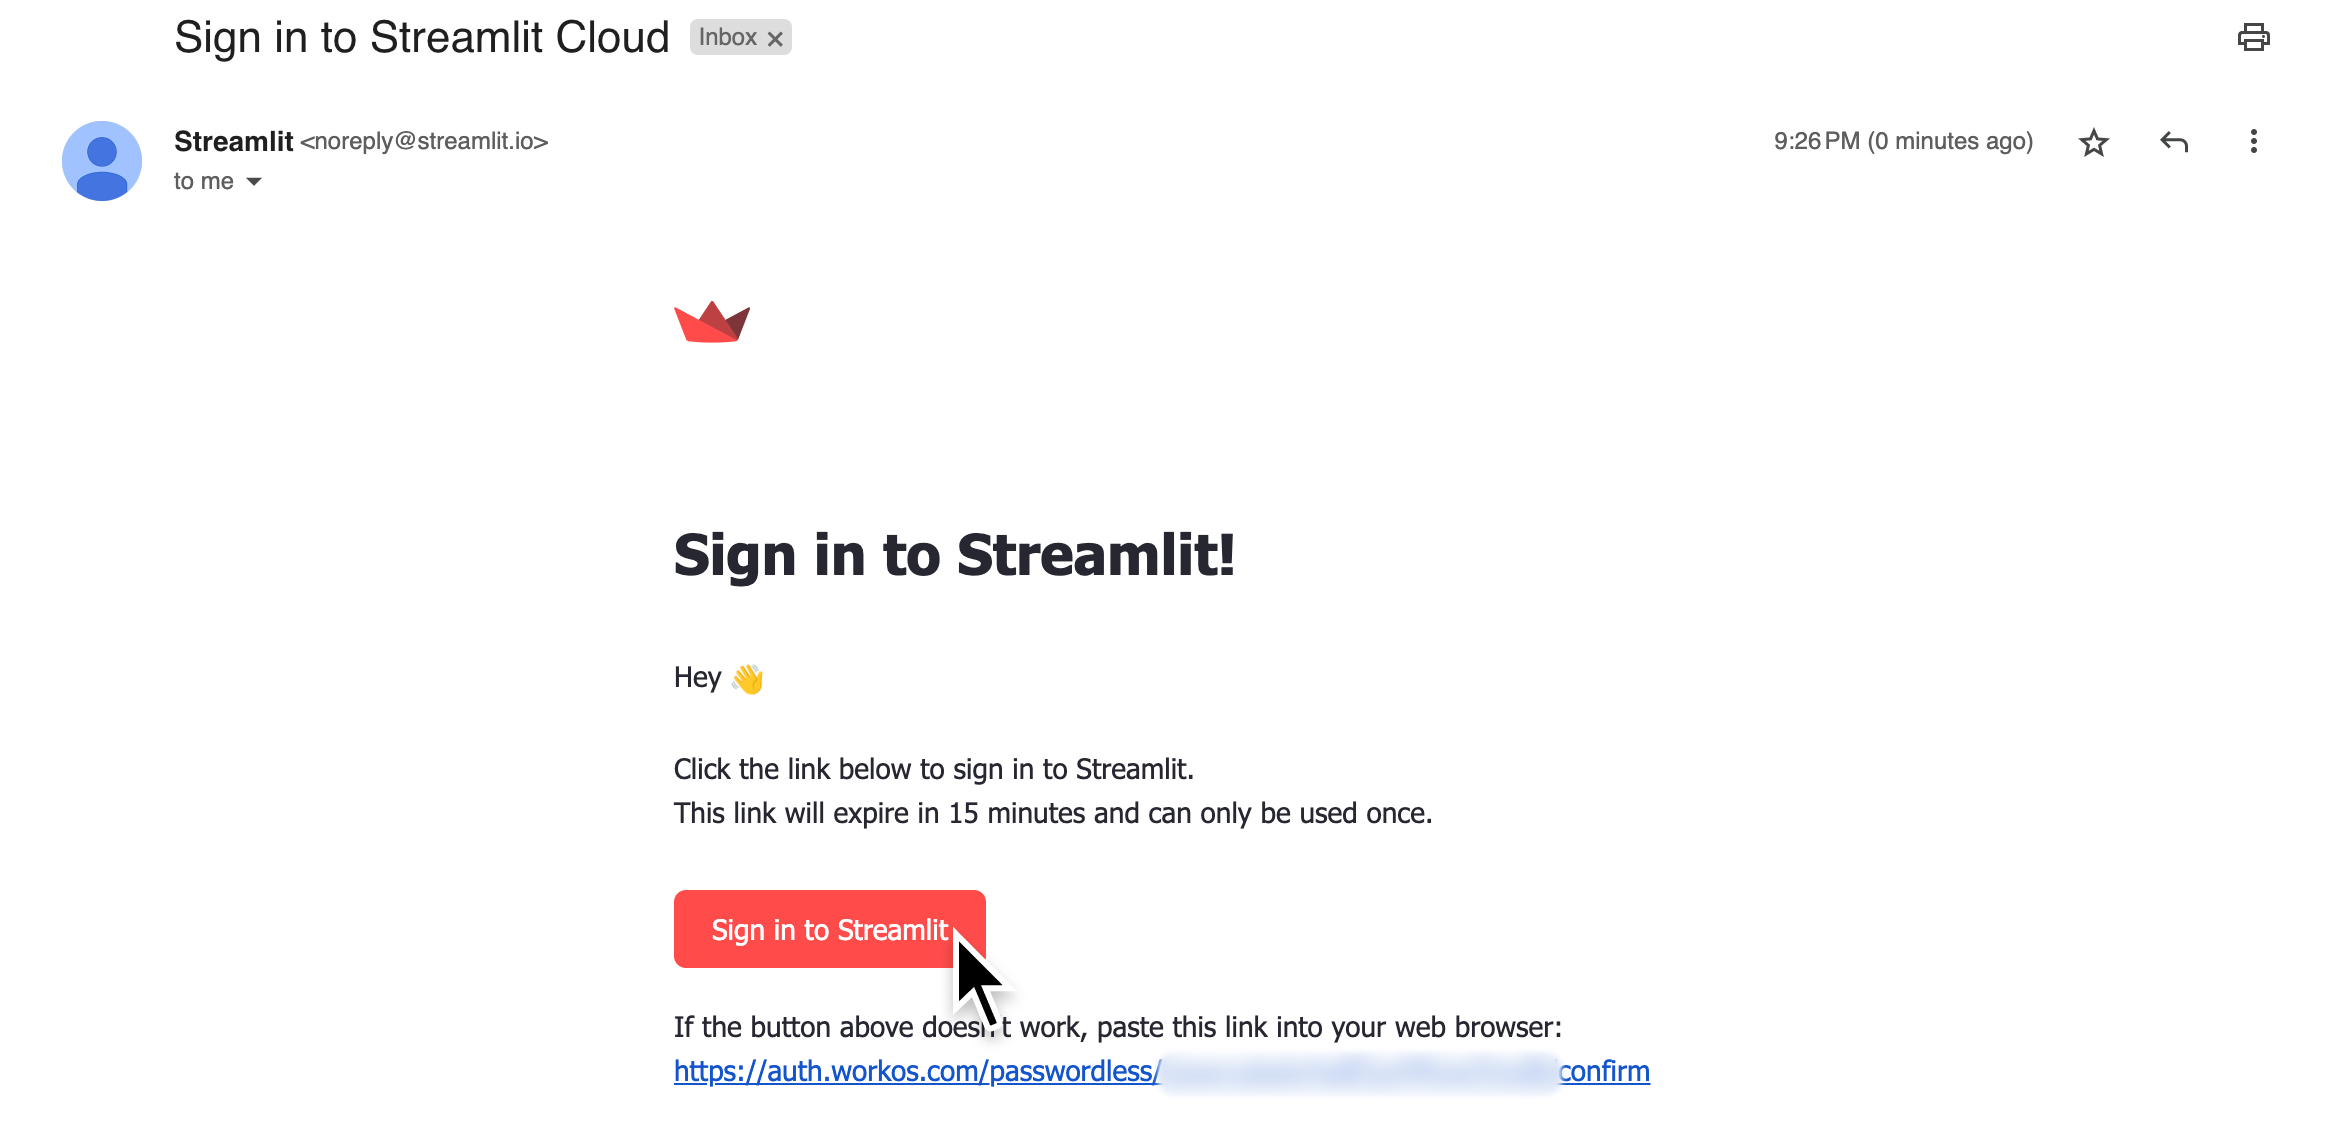 Streamlit Community Cloud sign-in email